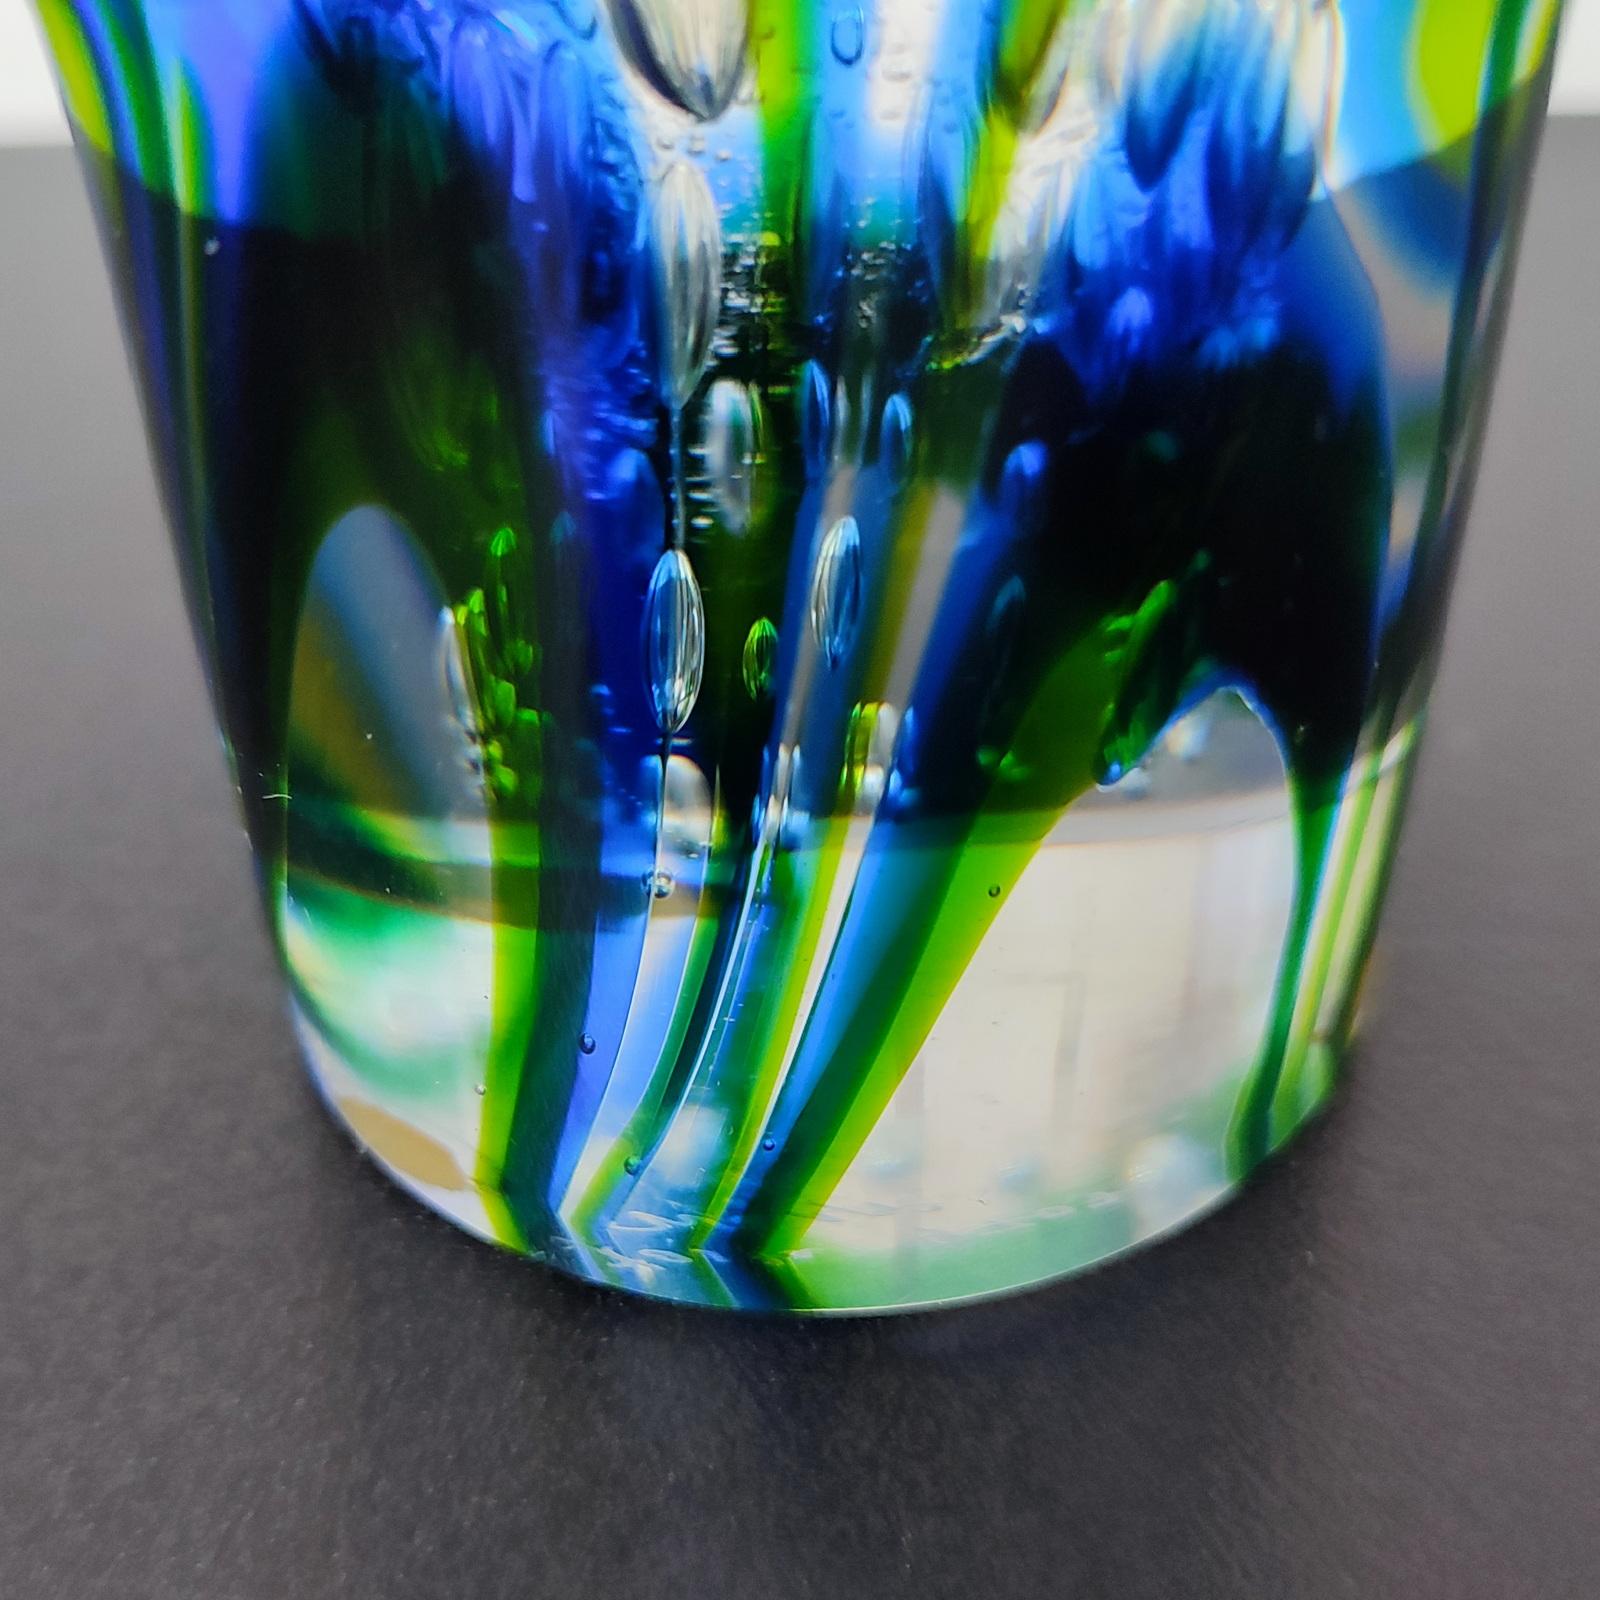 Mid-20th Century Glass Paperweight by Goran Warff for Kosta Boda, Rare Find - FREE SHIPPING For Sale